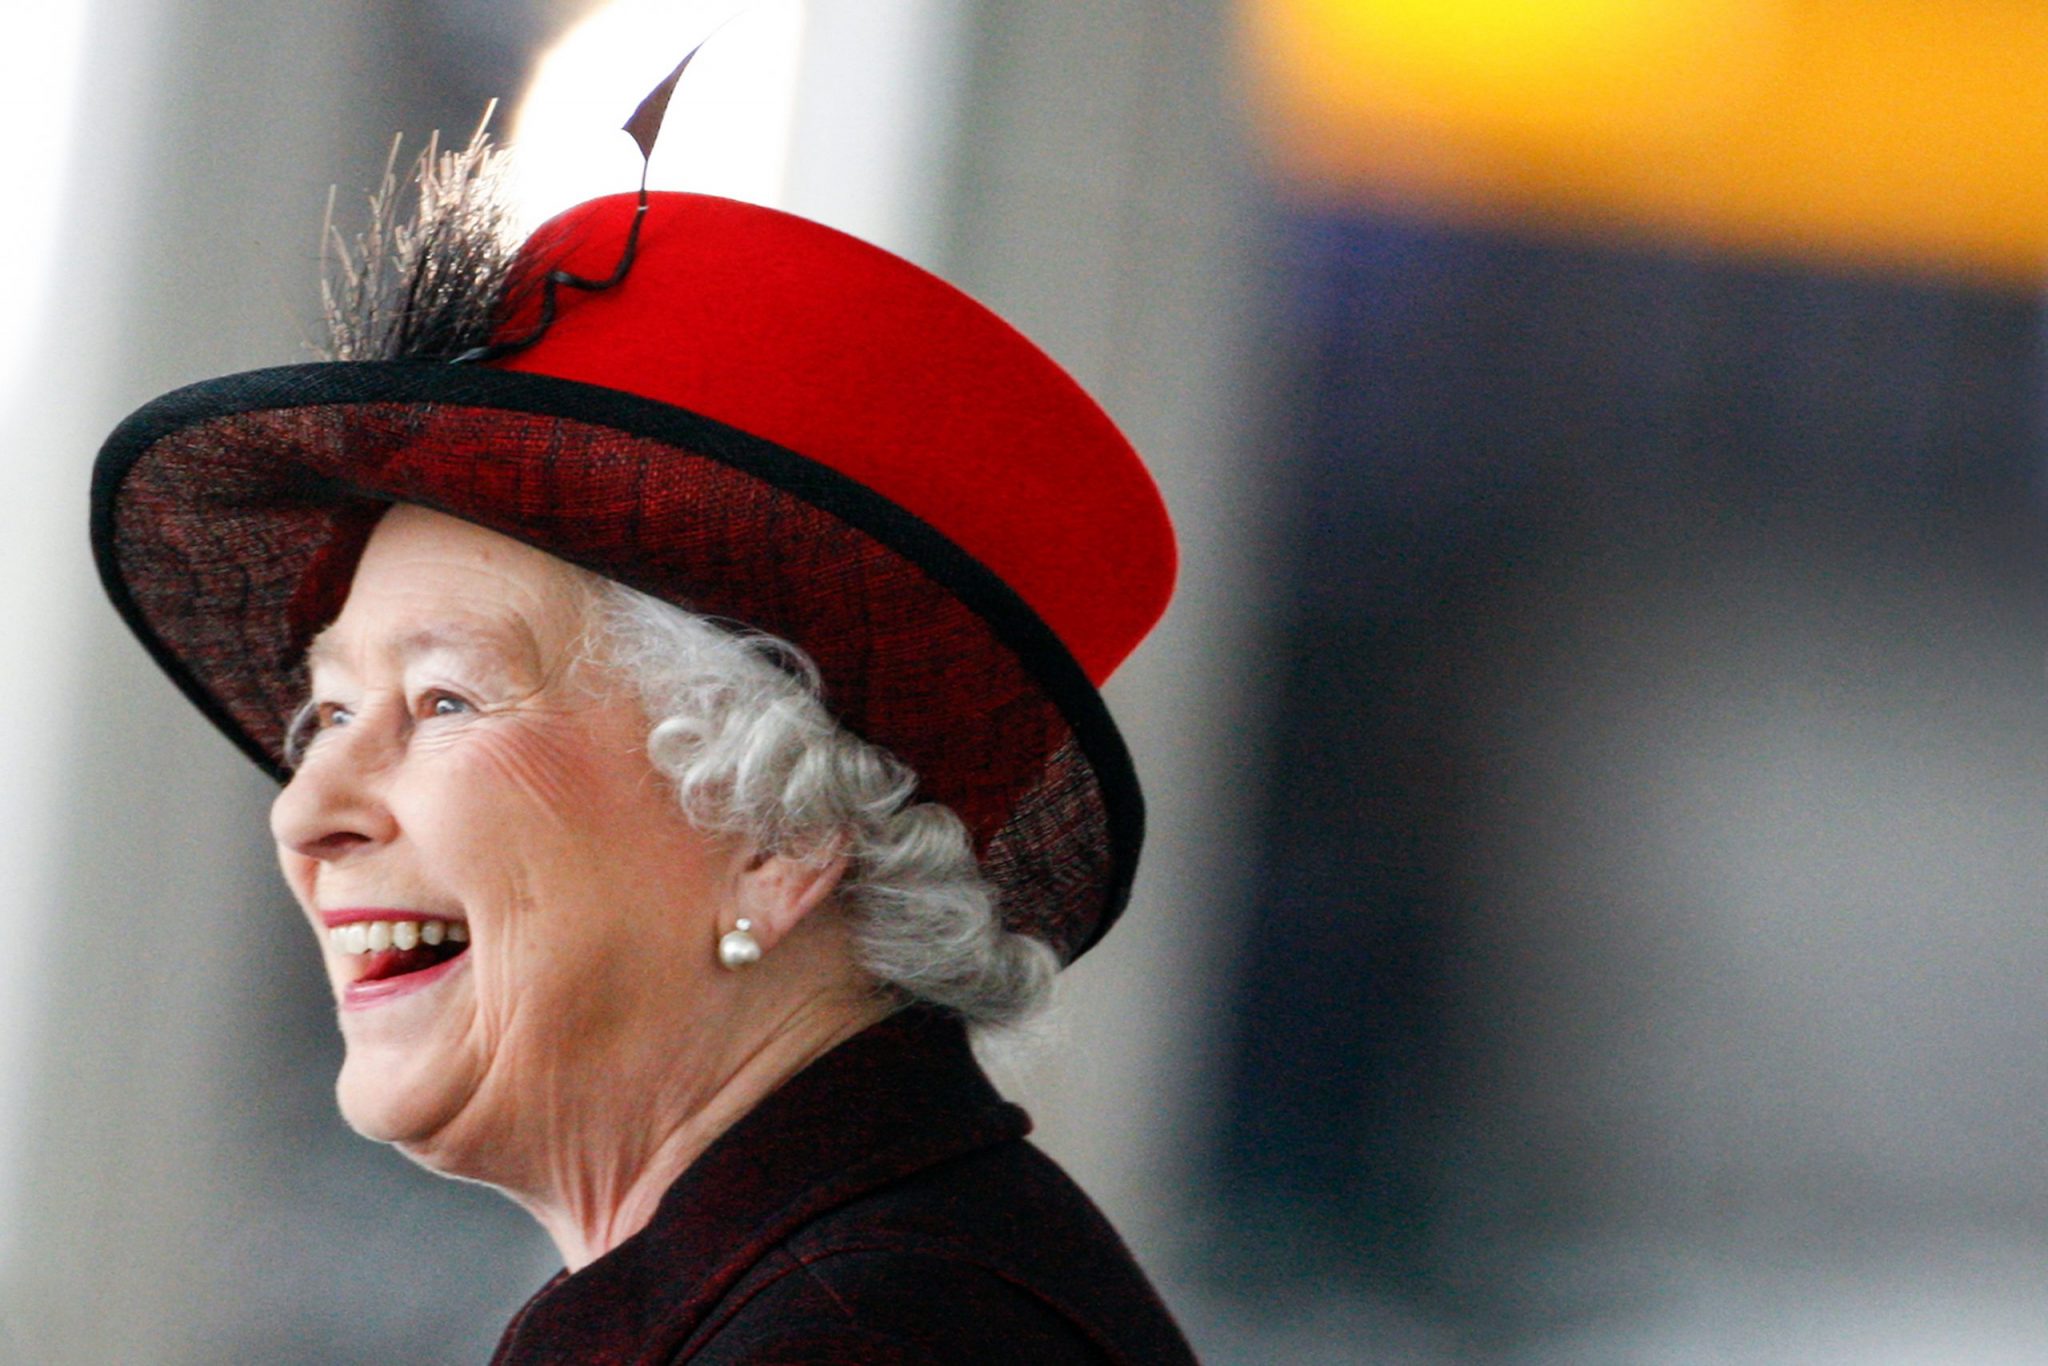 London, England - March 14, 2008: Her Royal Highness Queen Elizabeth II smiles during a visit in London.